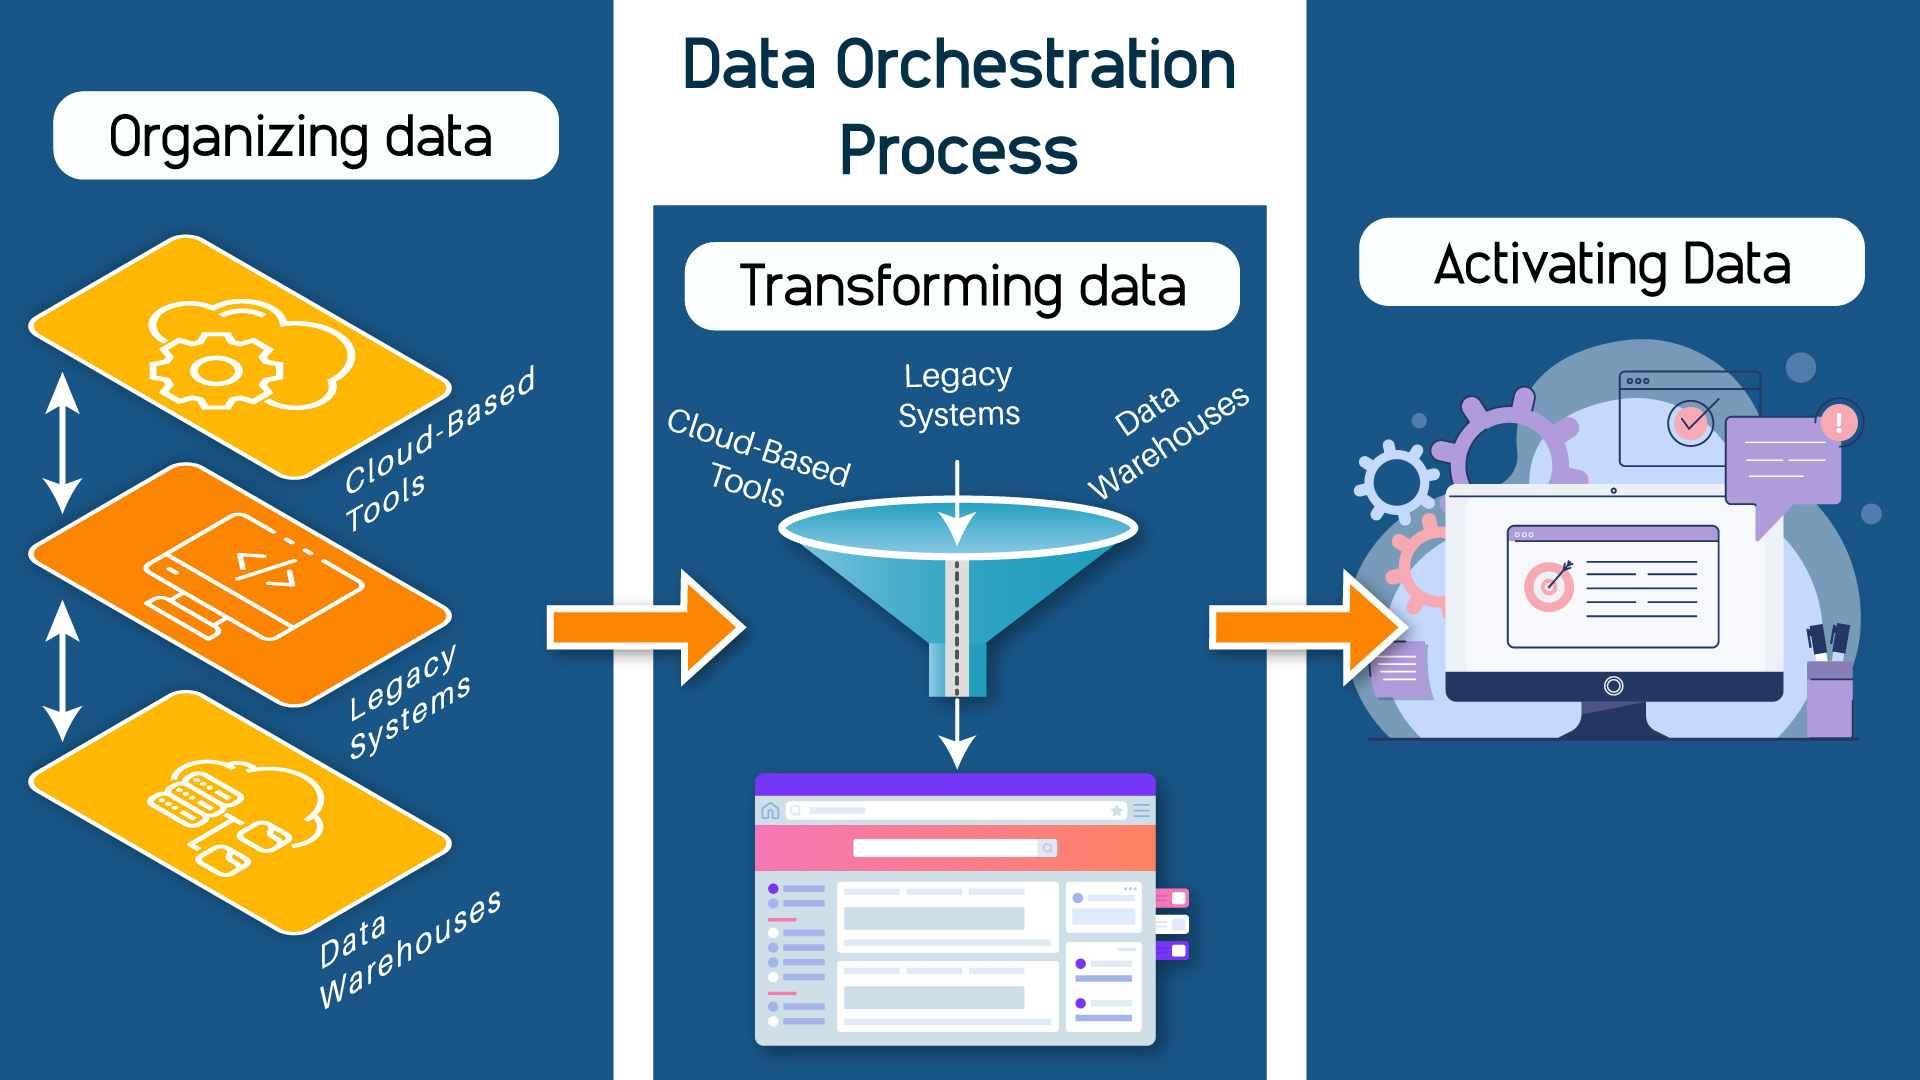 Optimized Data Orchestration can Power Your Data Value